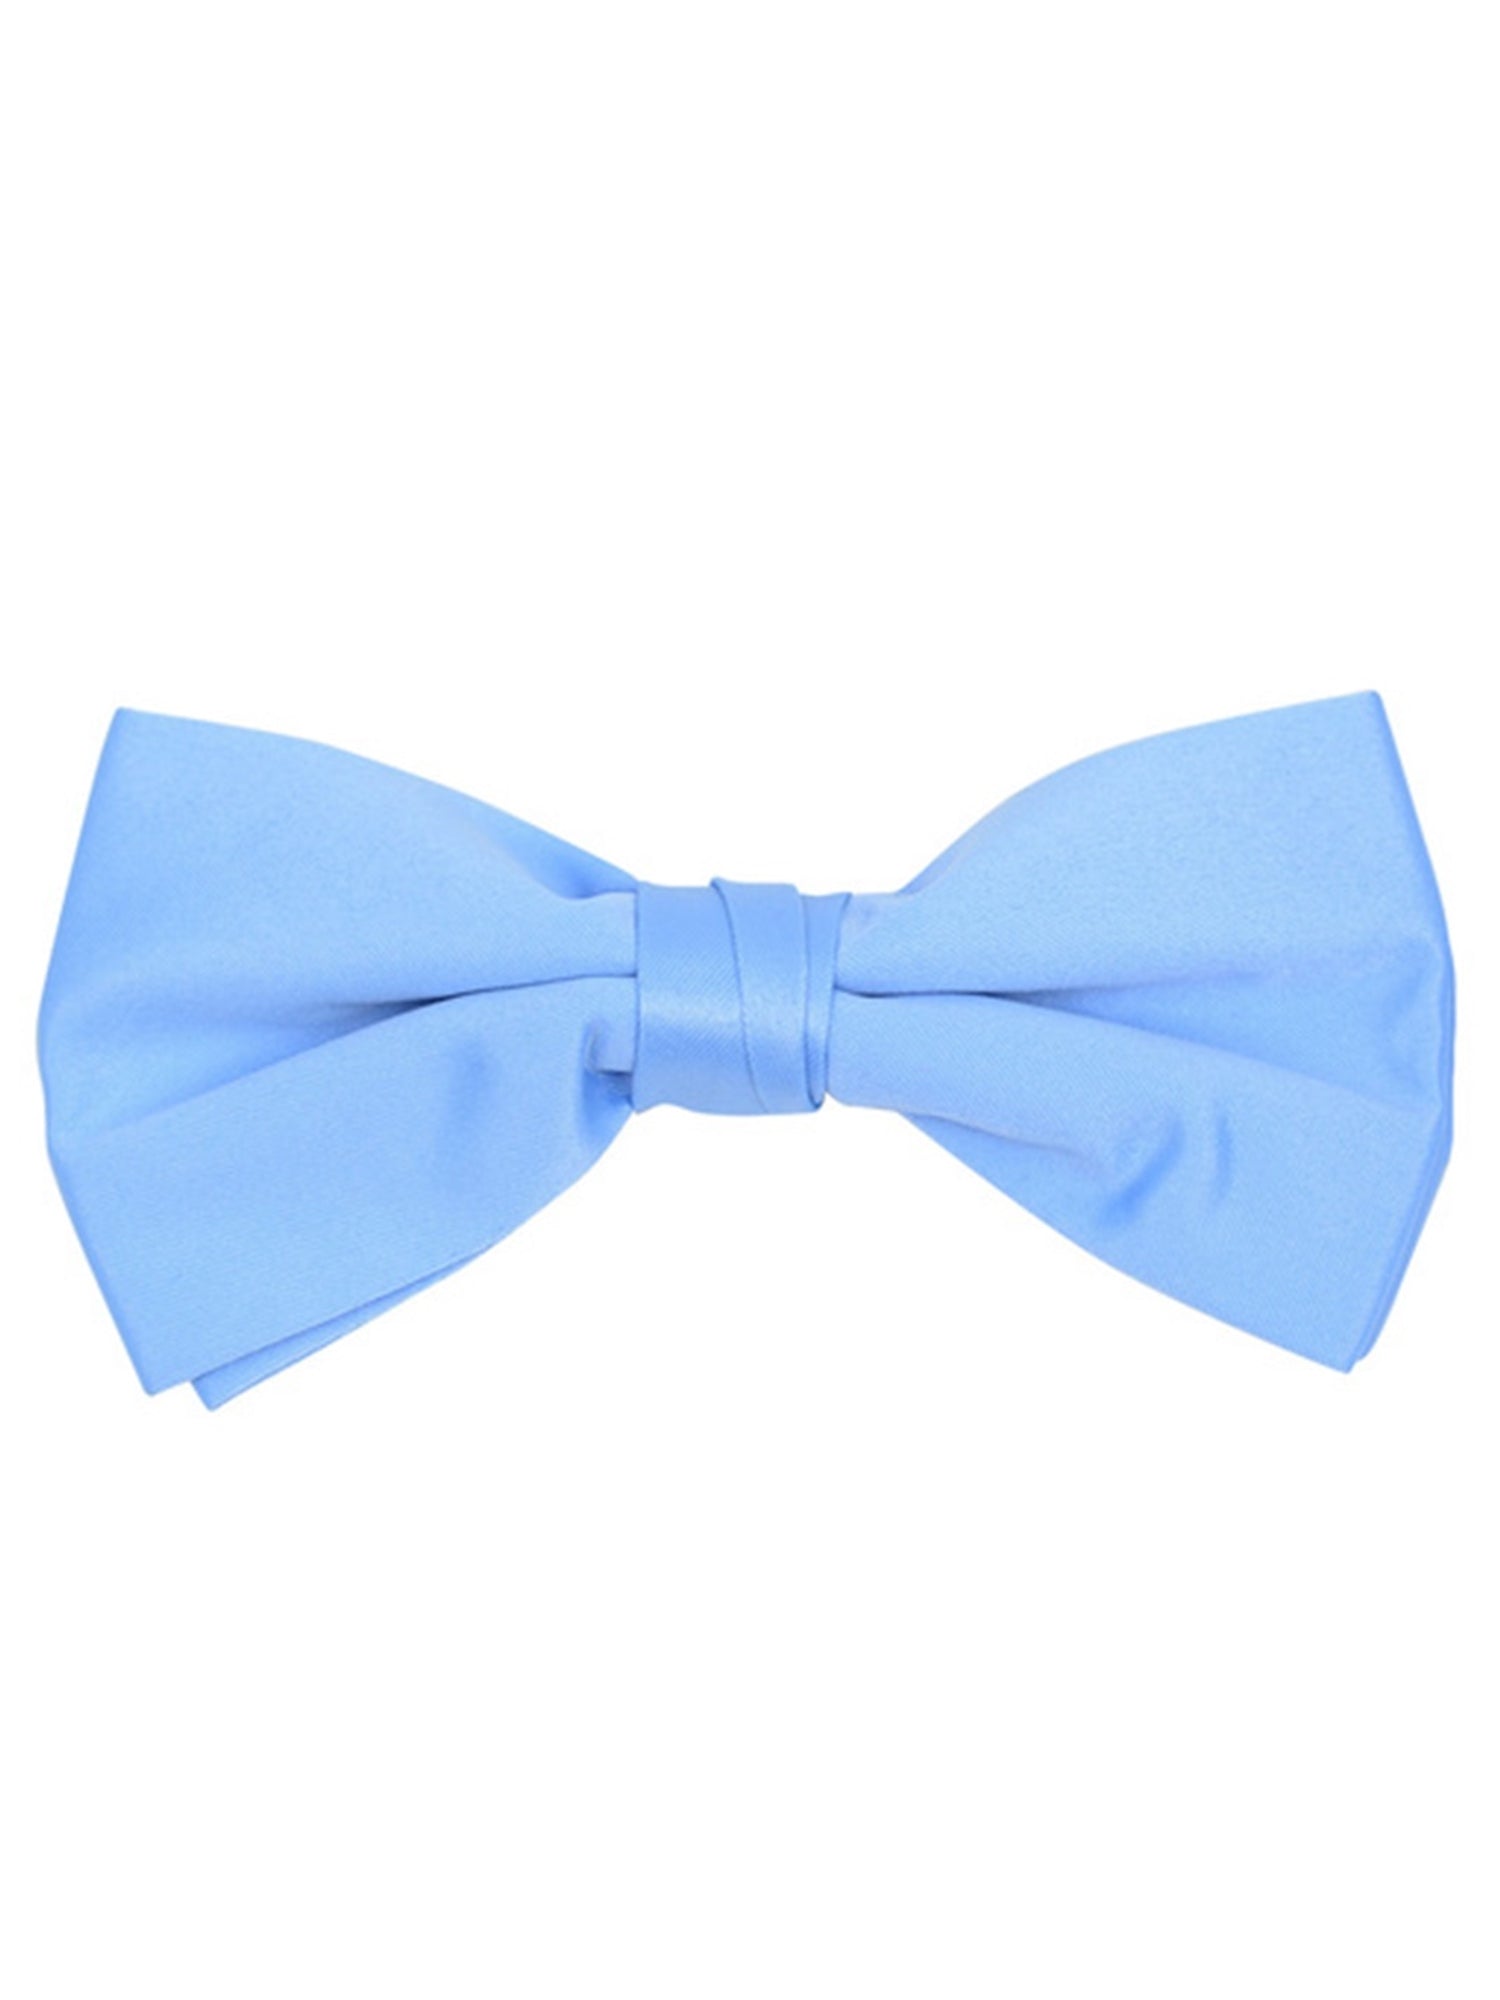 Young Boy's Pre-tied Adjustable Length Bow Tie - Formal Tuxedo Solid Color Boy's Solid Color Bow Tie TheDapperTie Sky Blue One Size 